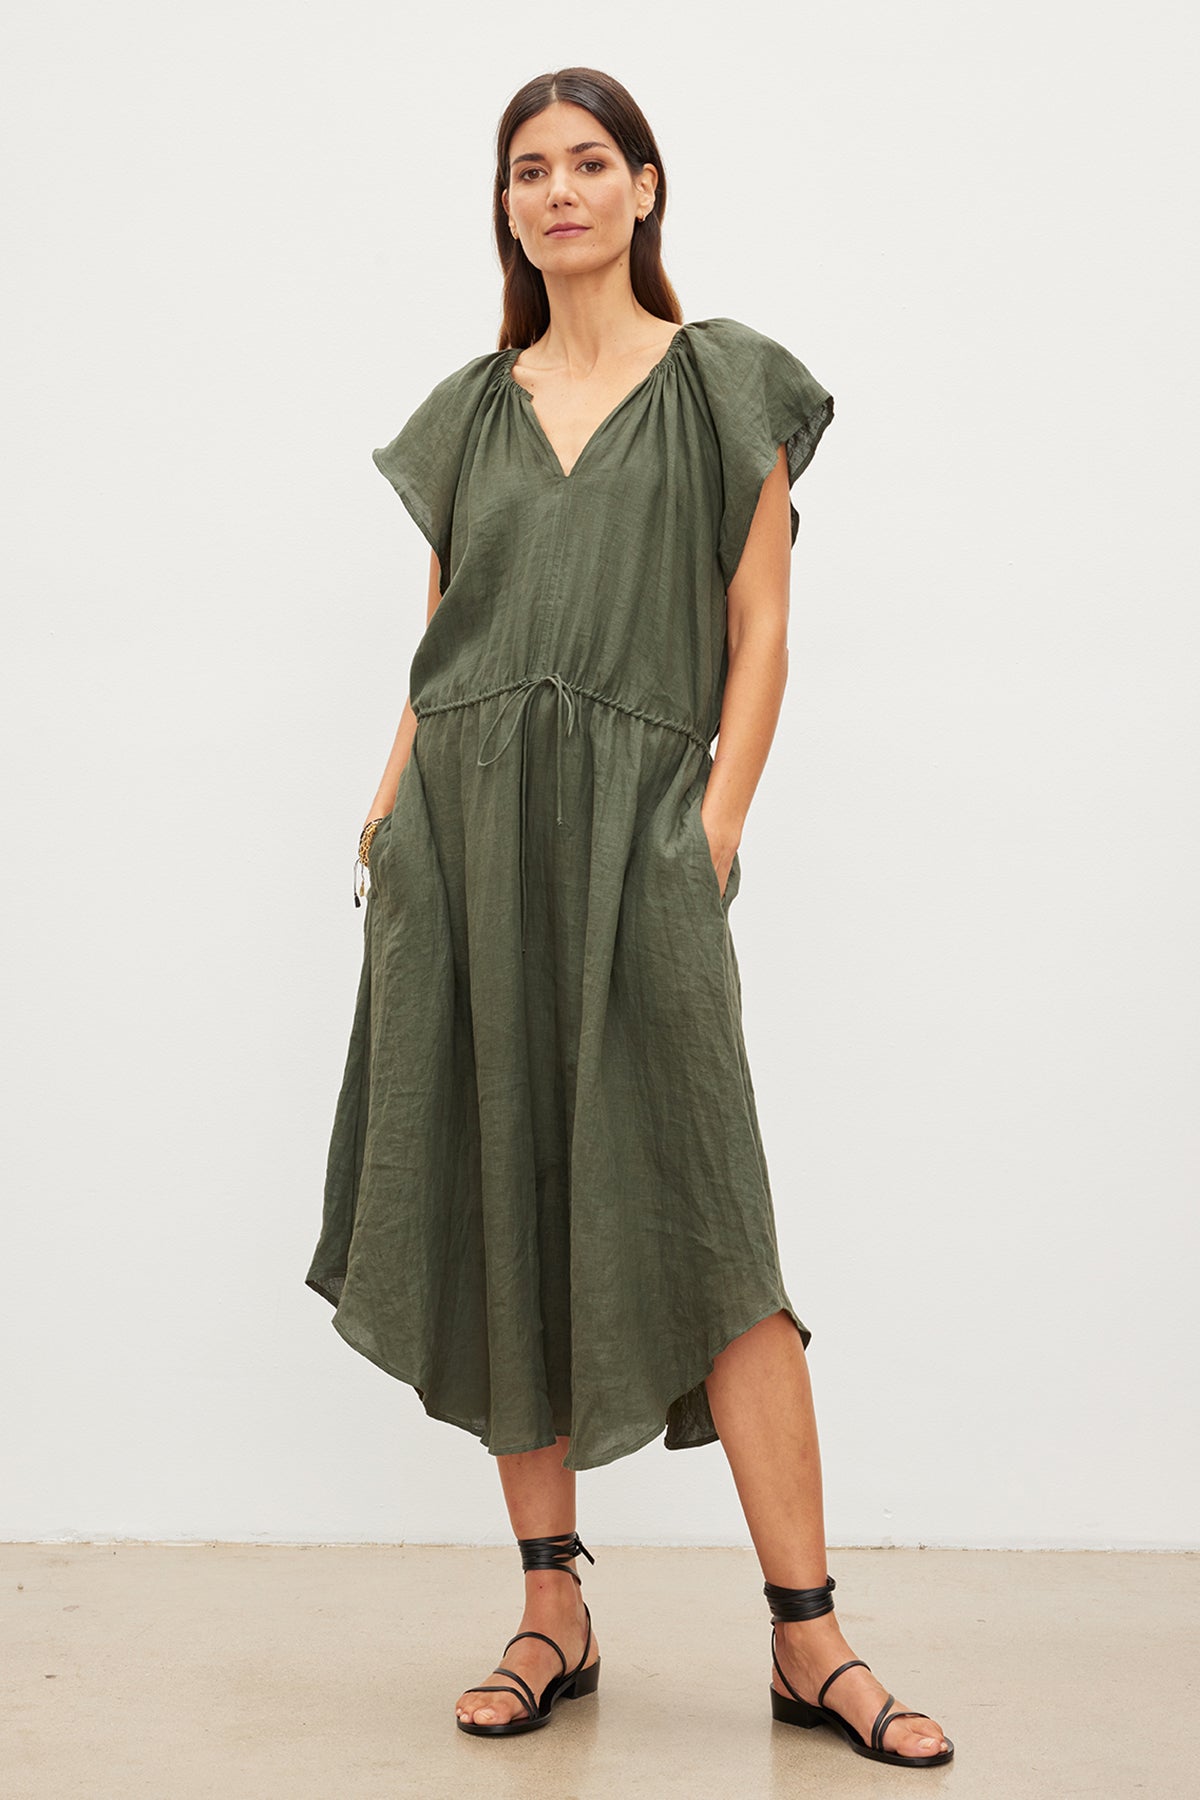 A woman stands in a studio, wearing a Velvet by Graham & Spencer green woven linen midi dress with a drawstring waist and black sandals. She has shoulder-length brown hair and a neutral expression.-35967692079297